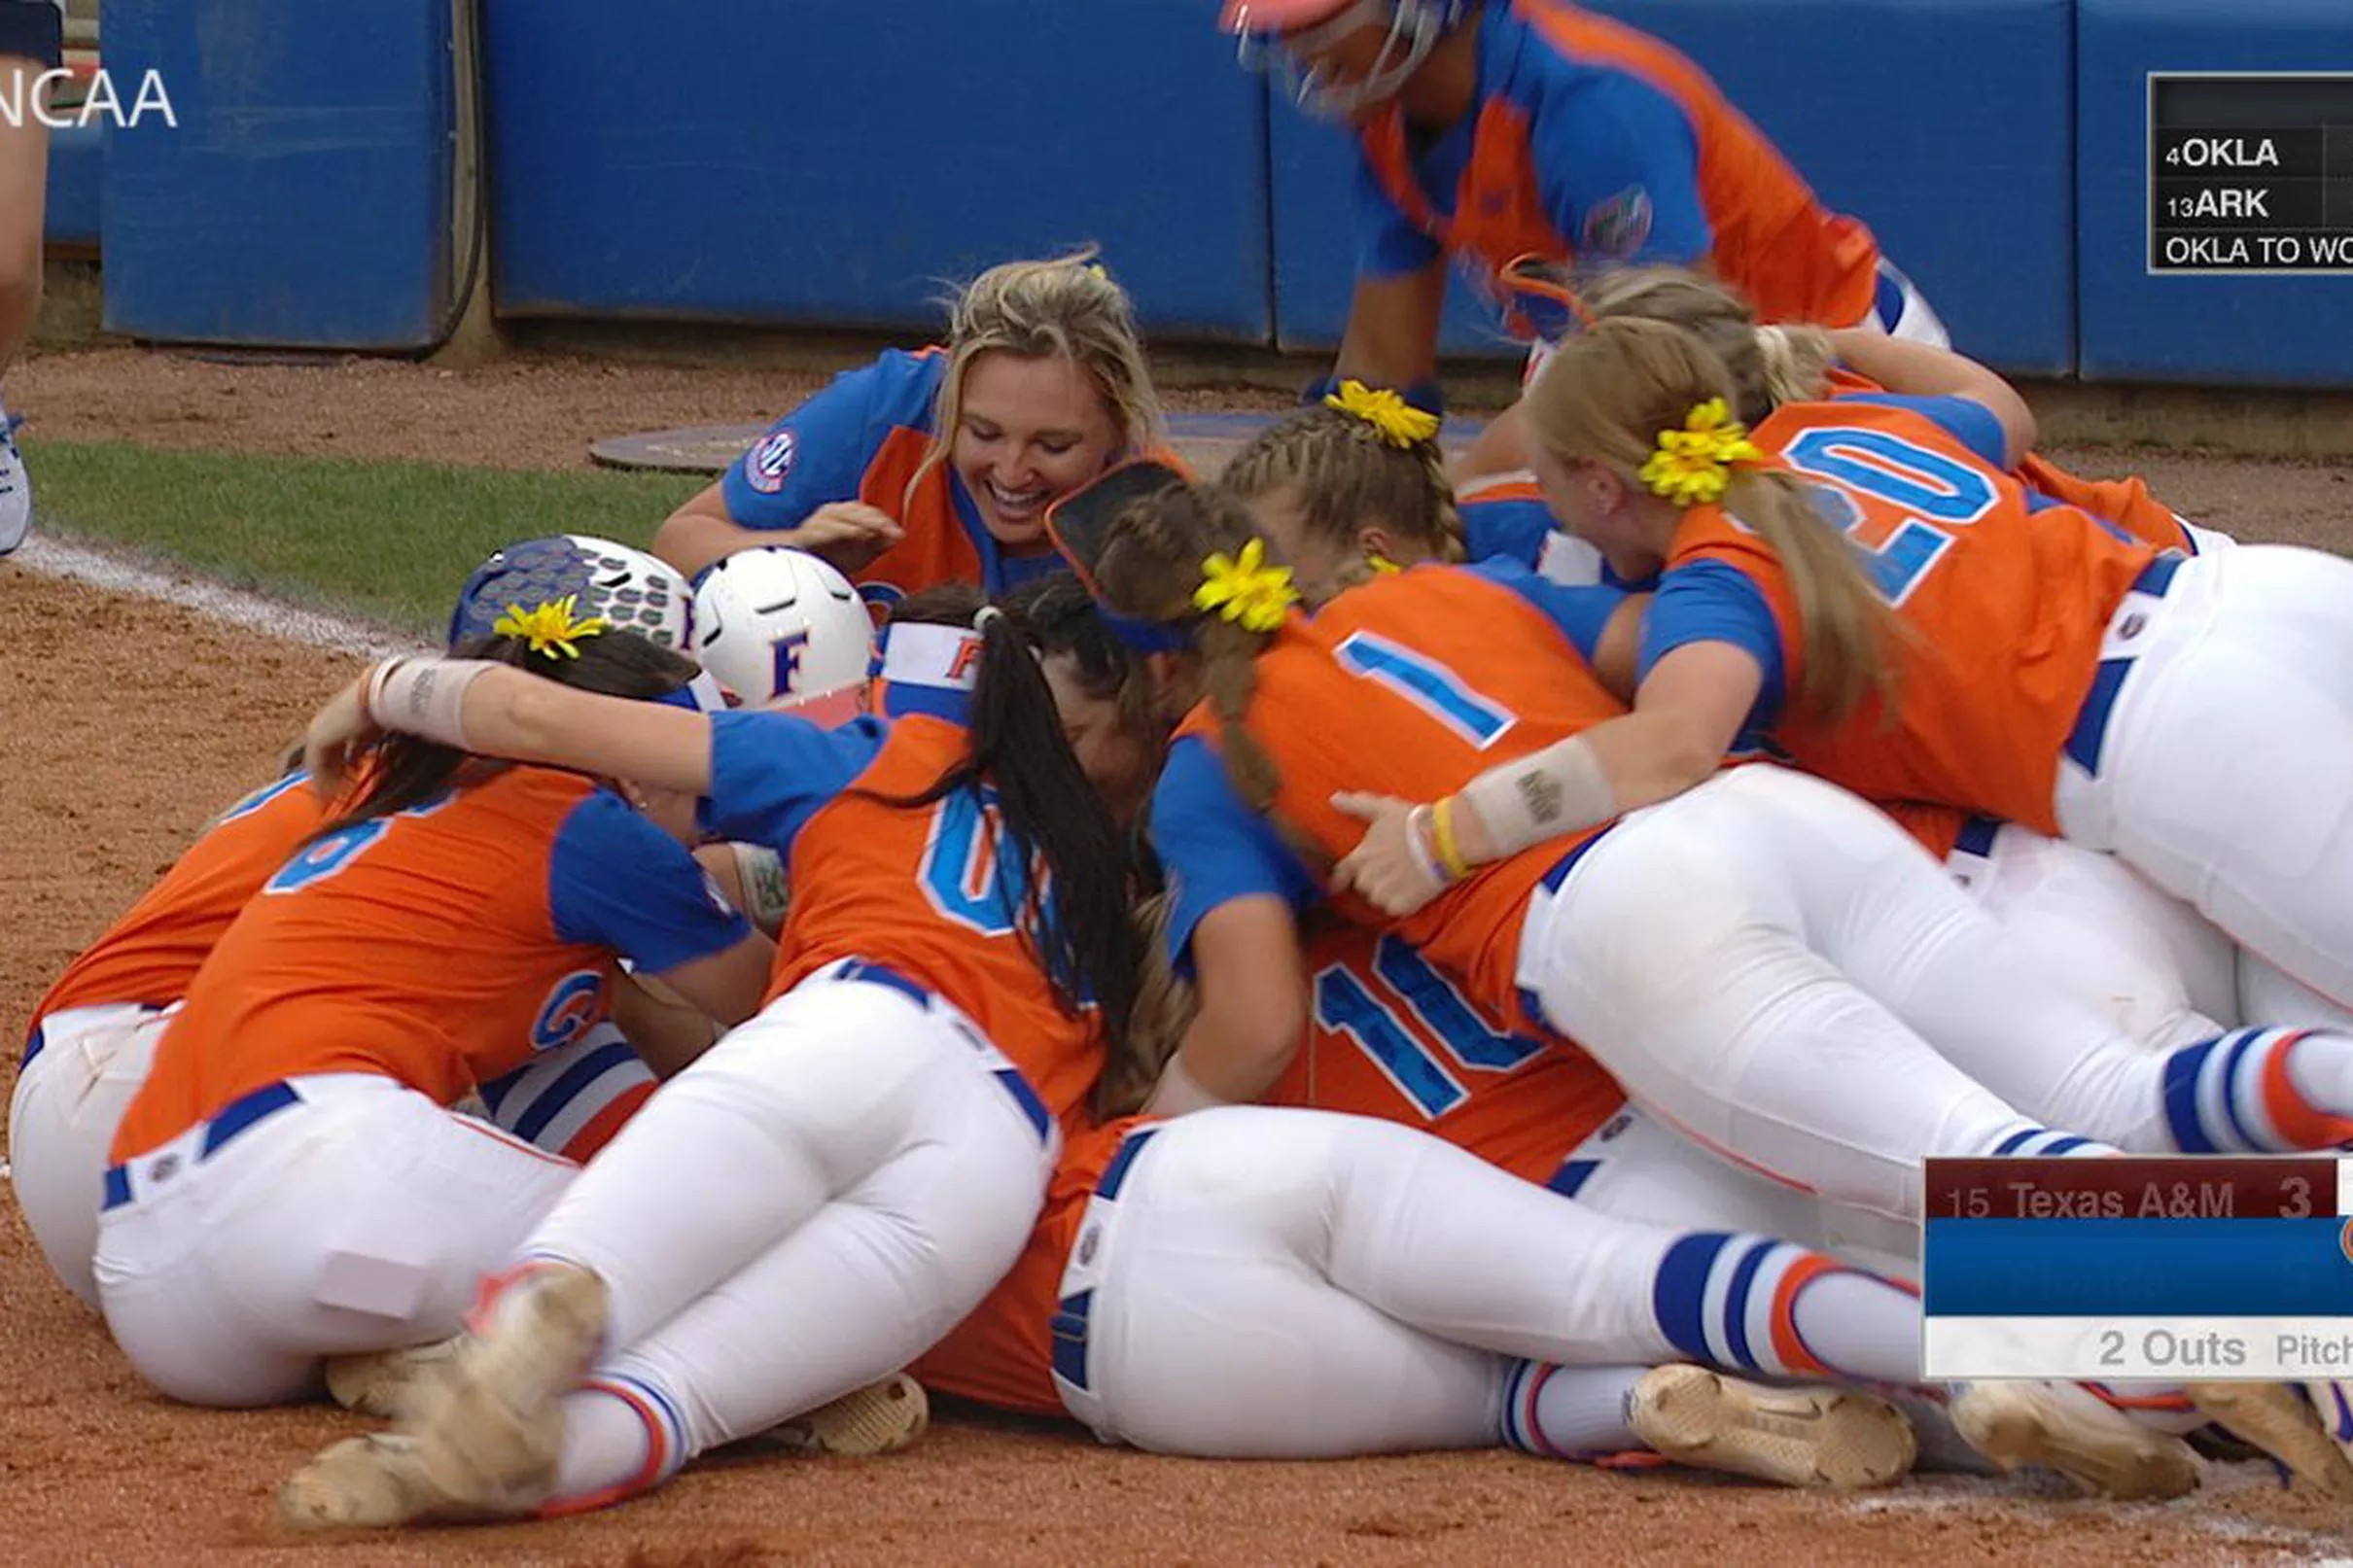 Jordanesque Florida Walks Off In Dramatic Fashion To Advance To Womens College World Series 9560